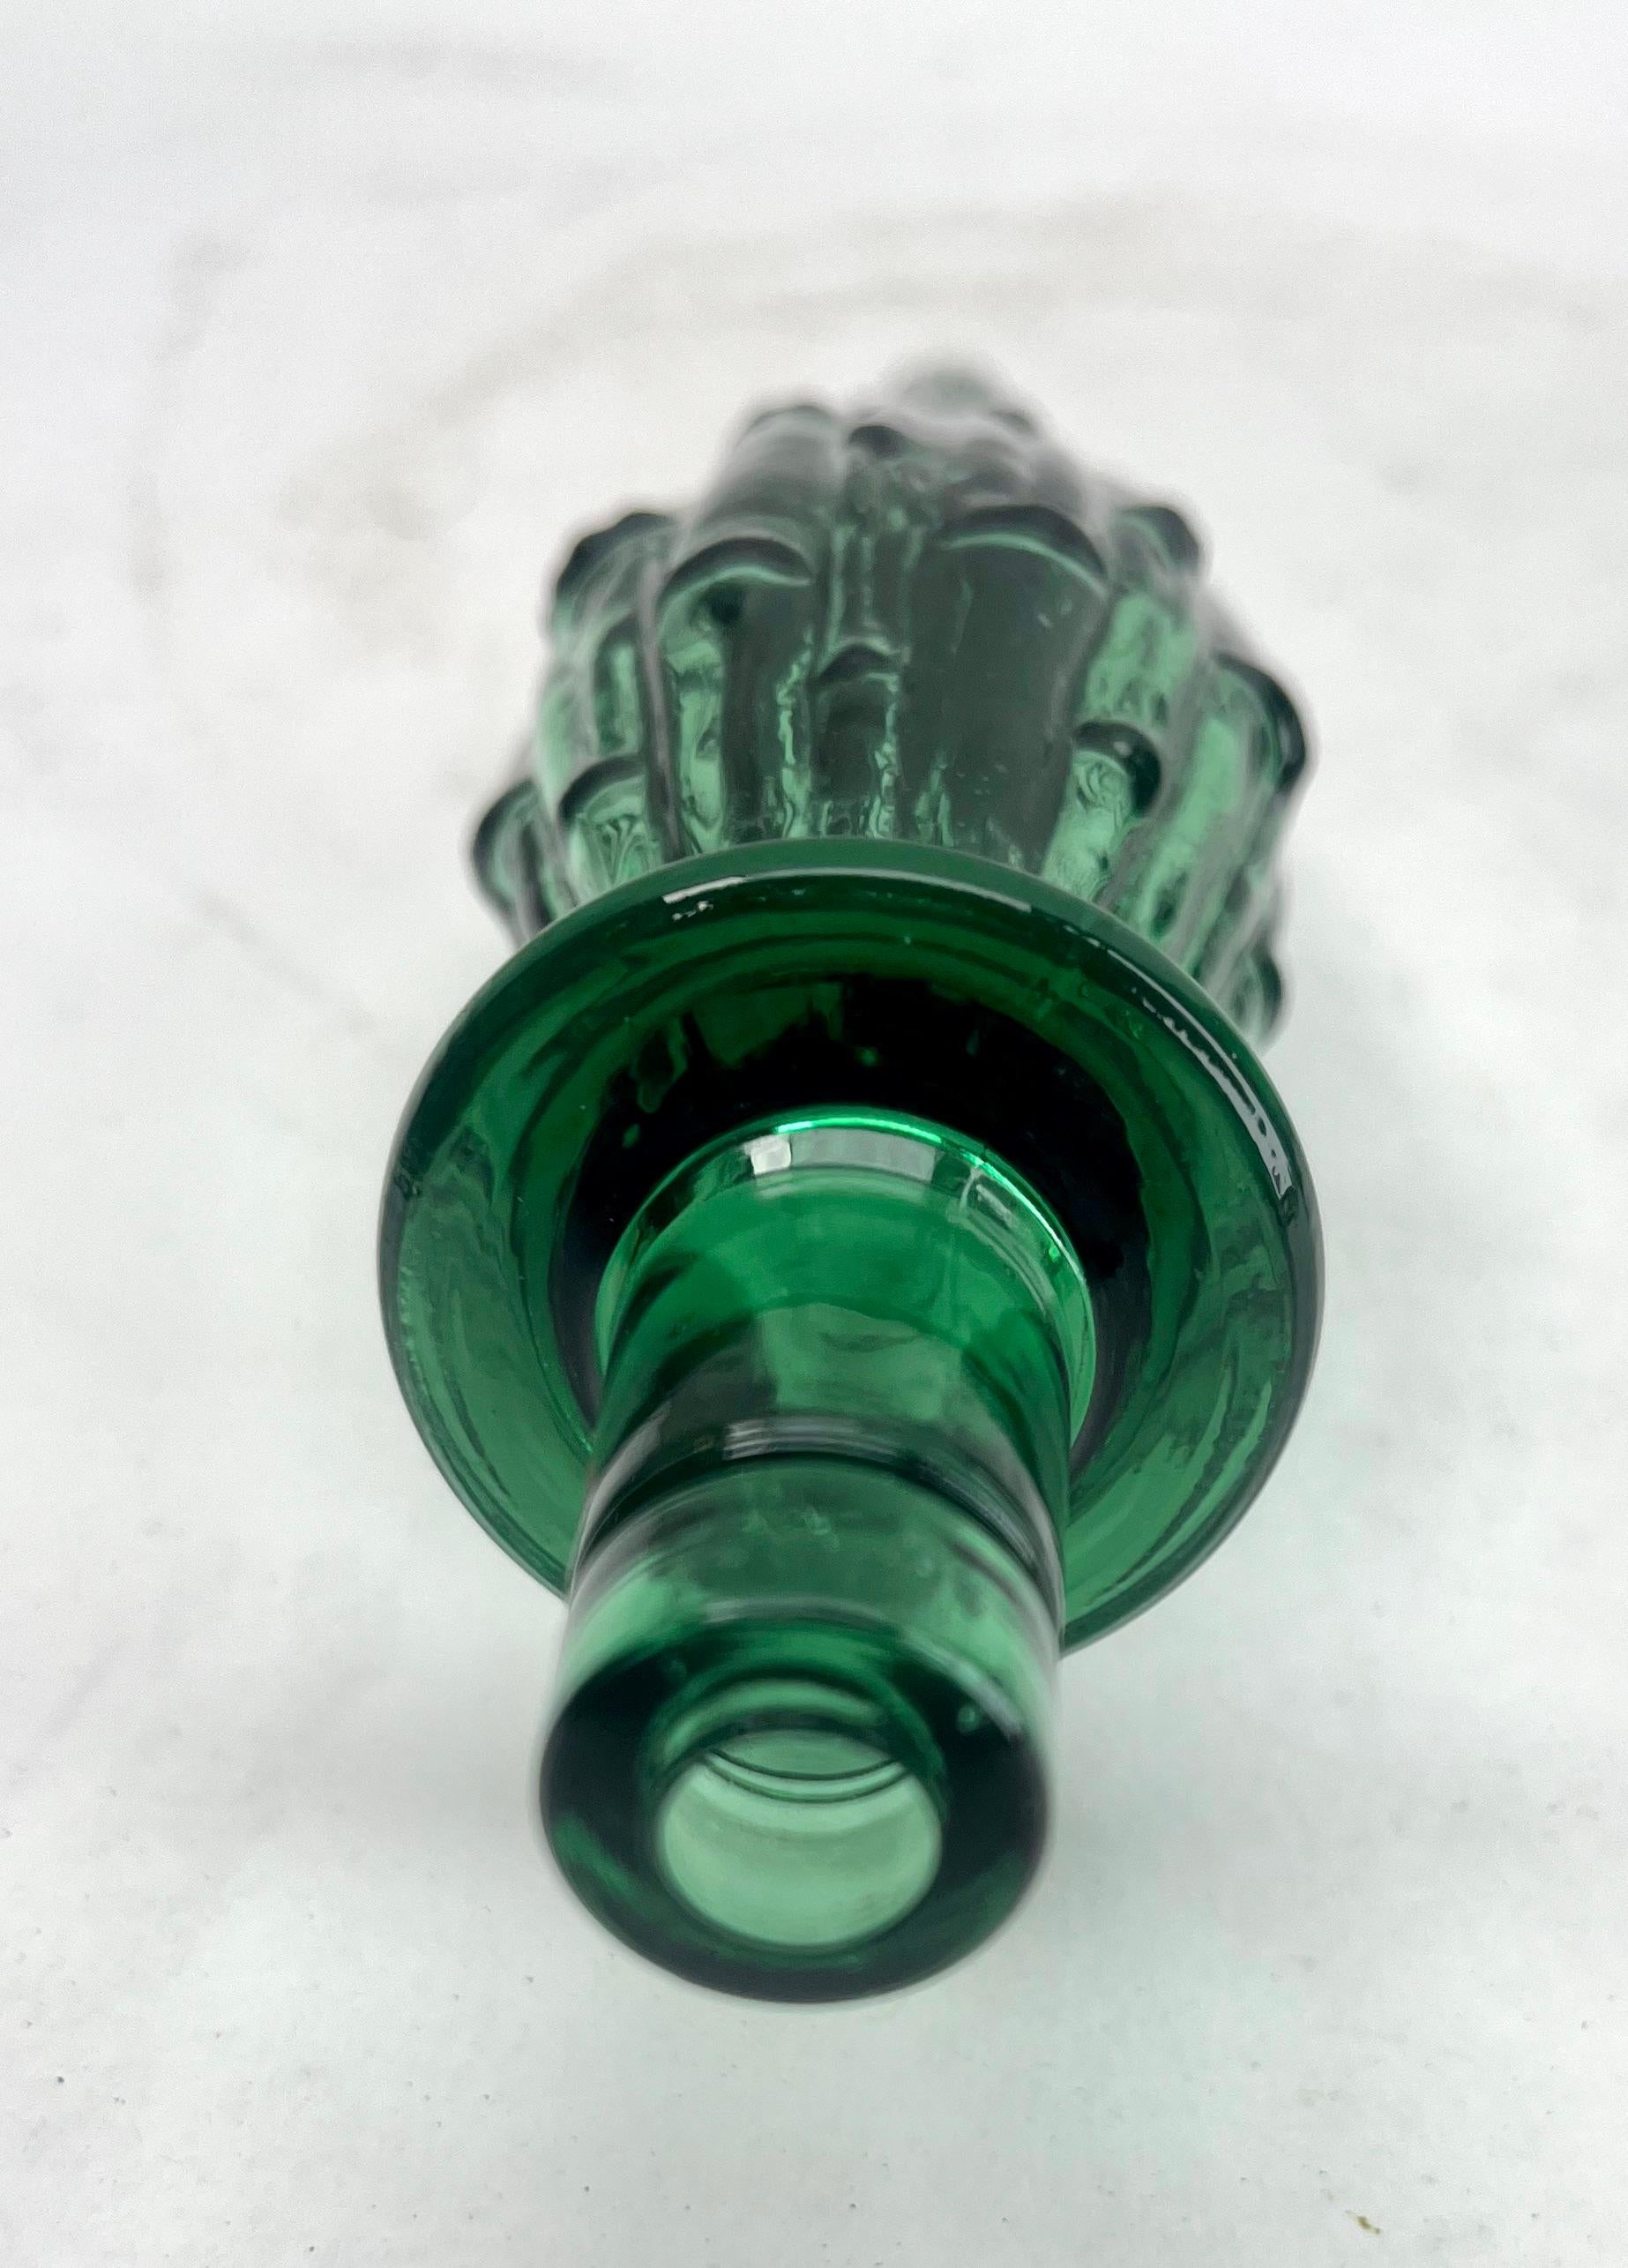 Italian Empoli Geniebottle Green Art Glass from the Mid-20th Century For Sale 4